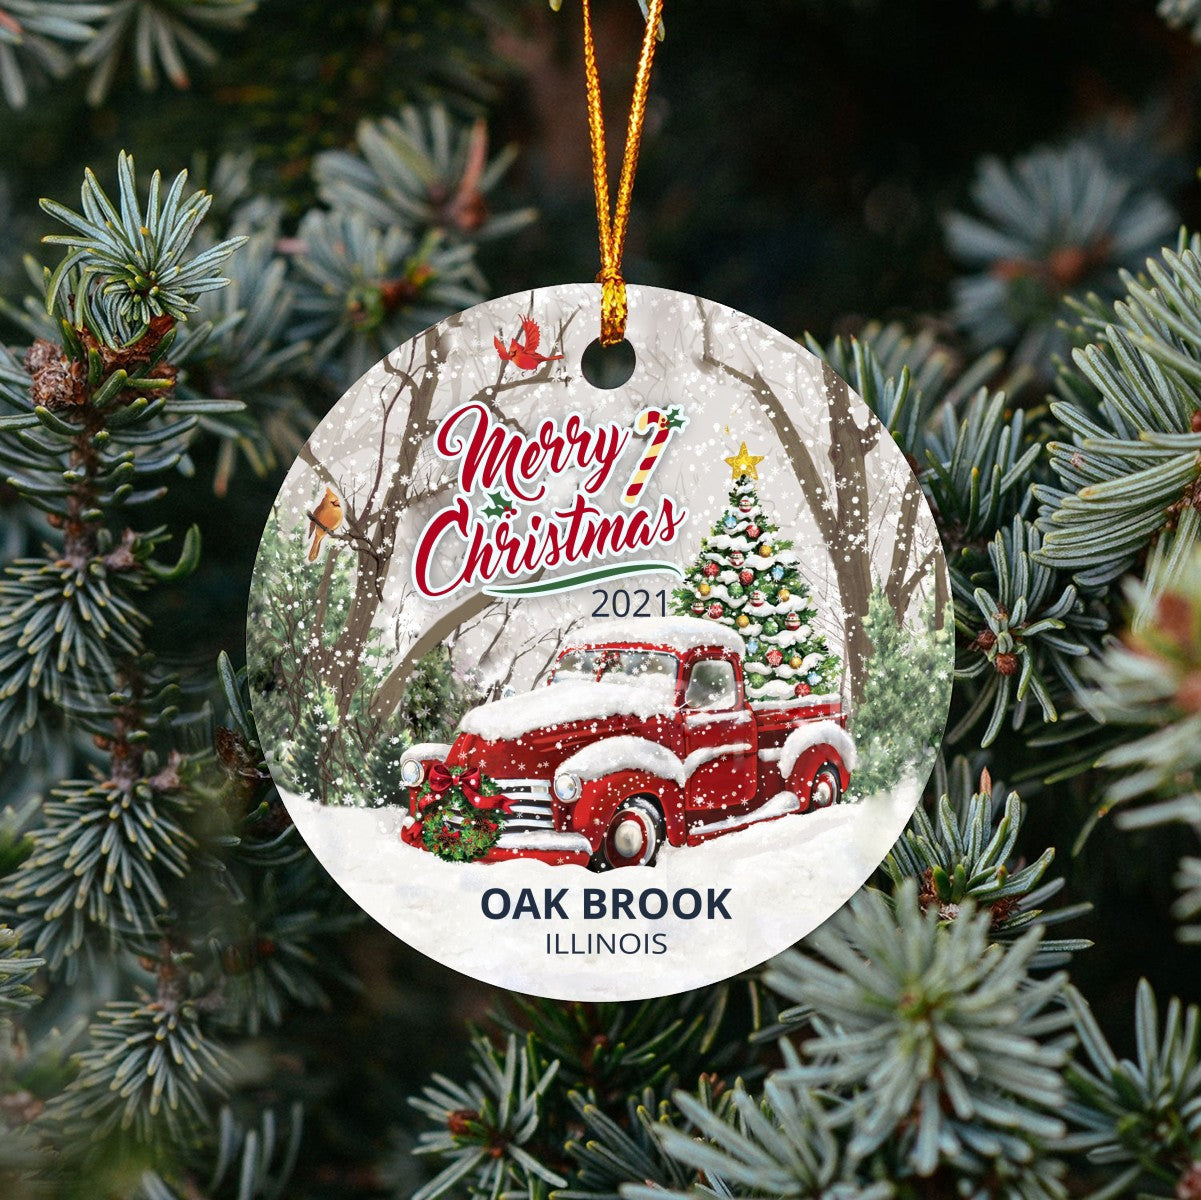 Christmas Tree Ornaments Oak Brook - Ornament With Name City, State Oak Brook Illinois IL Ornament - Red Truck Xmas Ornaments 3'' Plastic Gift For Family, Friend And Housewarming